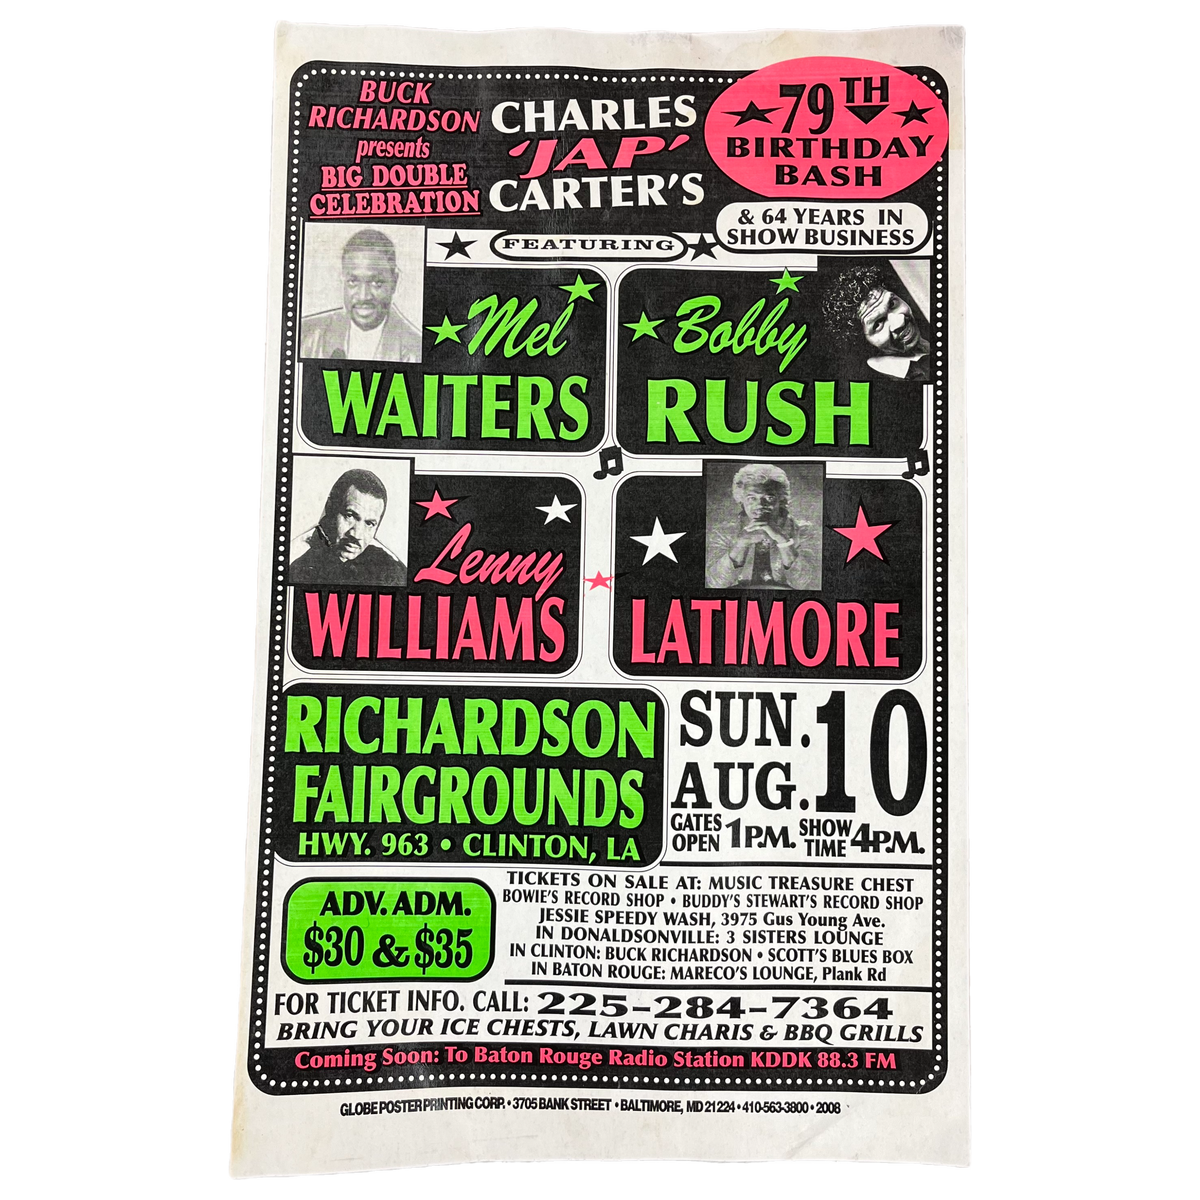 Vintage Buck Richardson Presents Charlie Jap Carter&#39;s 79th Birthday Bash Mel Waiters Bobby Rush Lenny Williams Latimore &quot;Globe Poster Printing Corp&quot; Show Poster